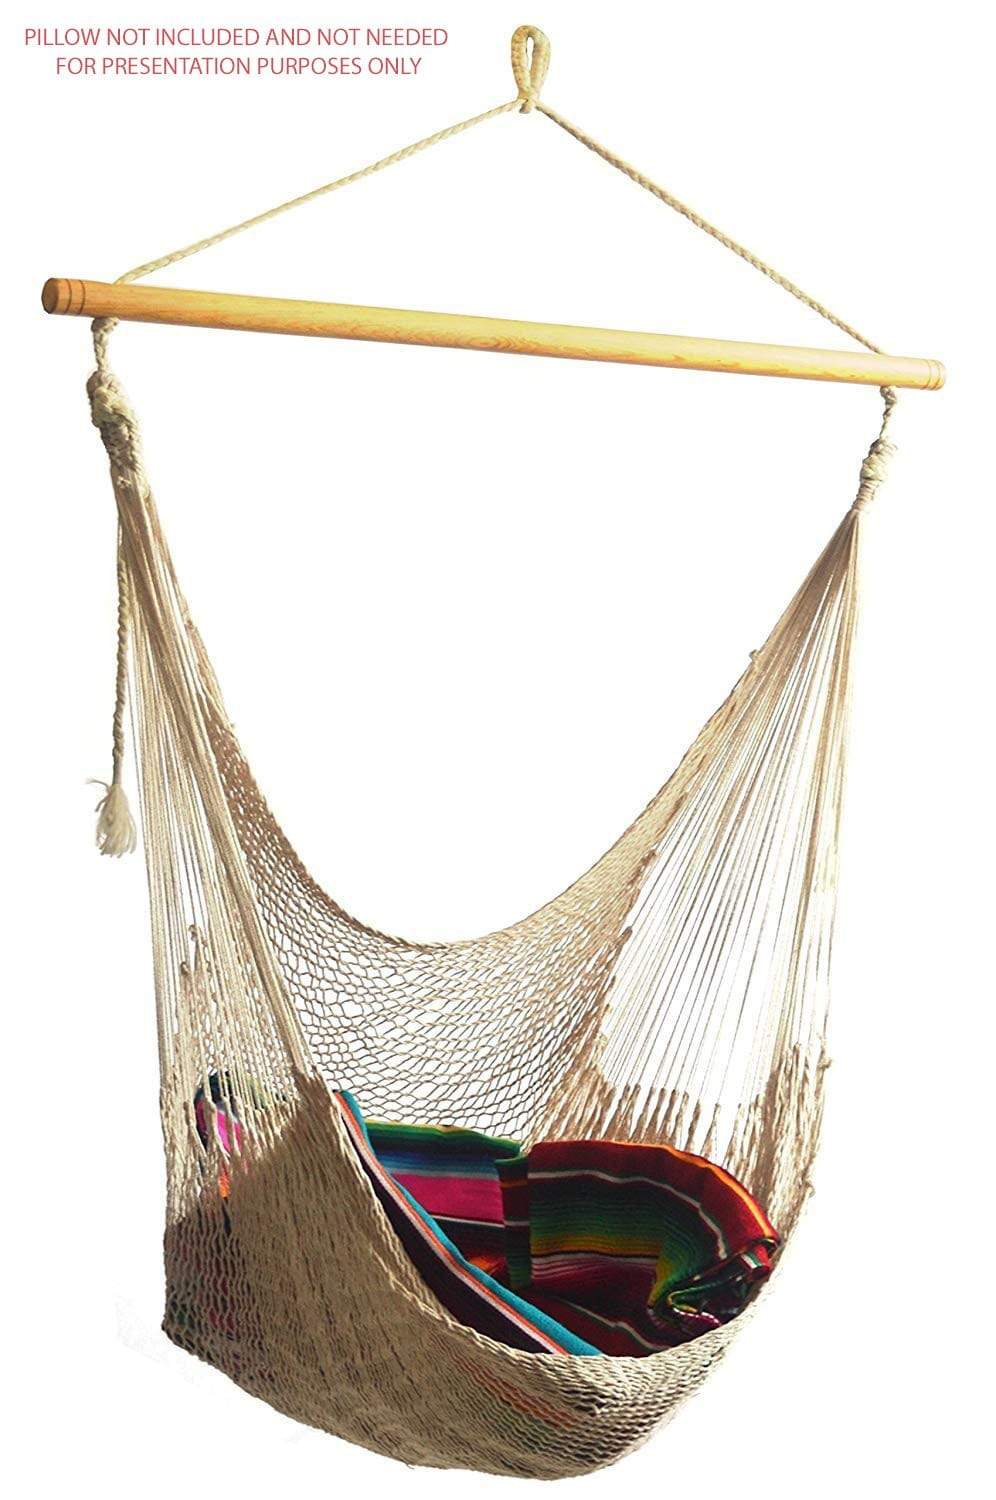 Hammock Universe Canada Deluxe Mayan Hammock Chair with Universal Chair Stand natural / ca 794604045924 MCDN+75217-2G